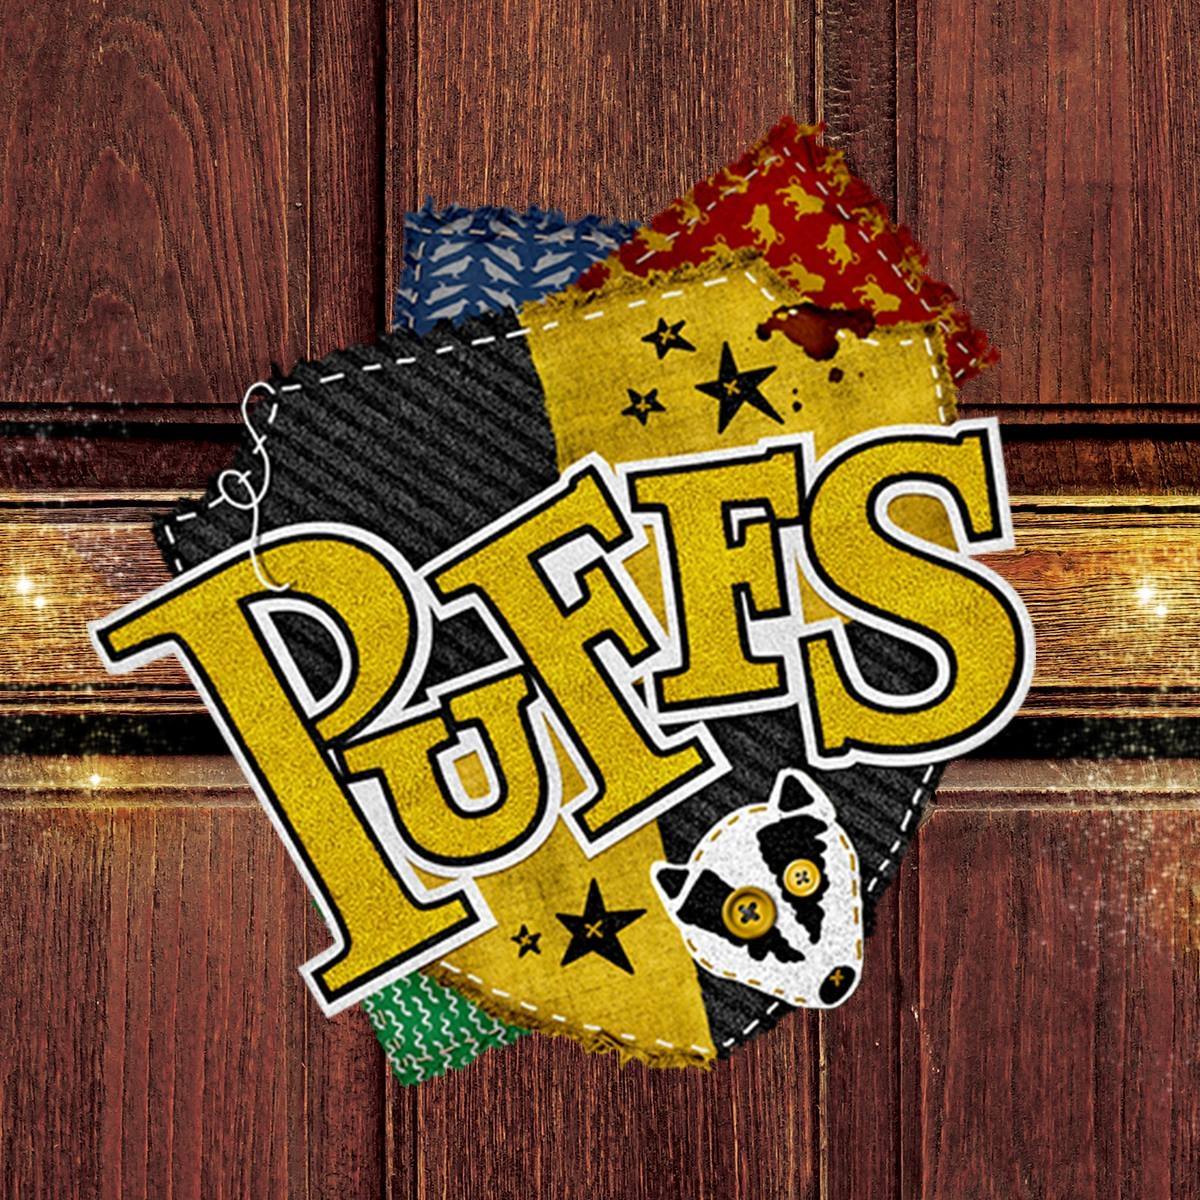 The story of those living in the 'house' that never wins is being told on the stage of the Flag Theatre! 🧙‍♂️Check out Family Community Theatre's production of 'Puffs' April 18-21. More! visithutch.com/upcoming-event… #LoveHutch #ToTheStarsKS #LoveHutch